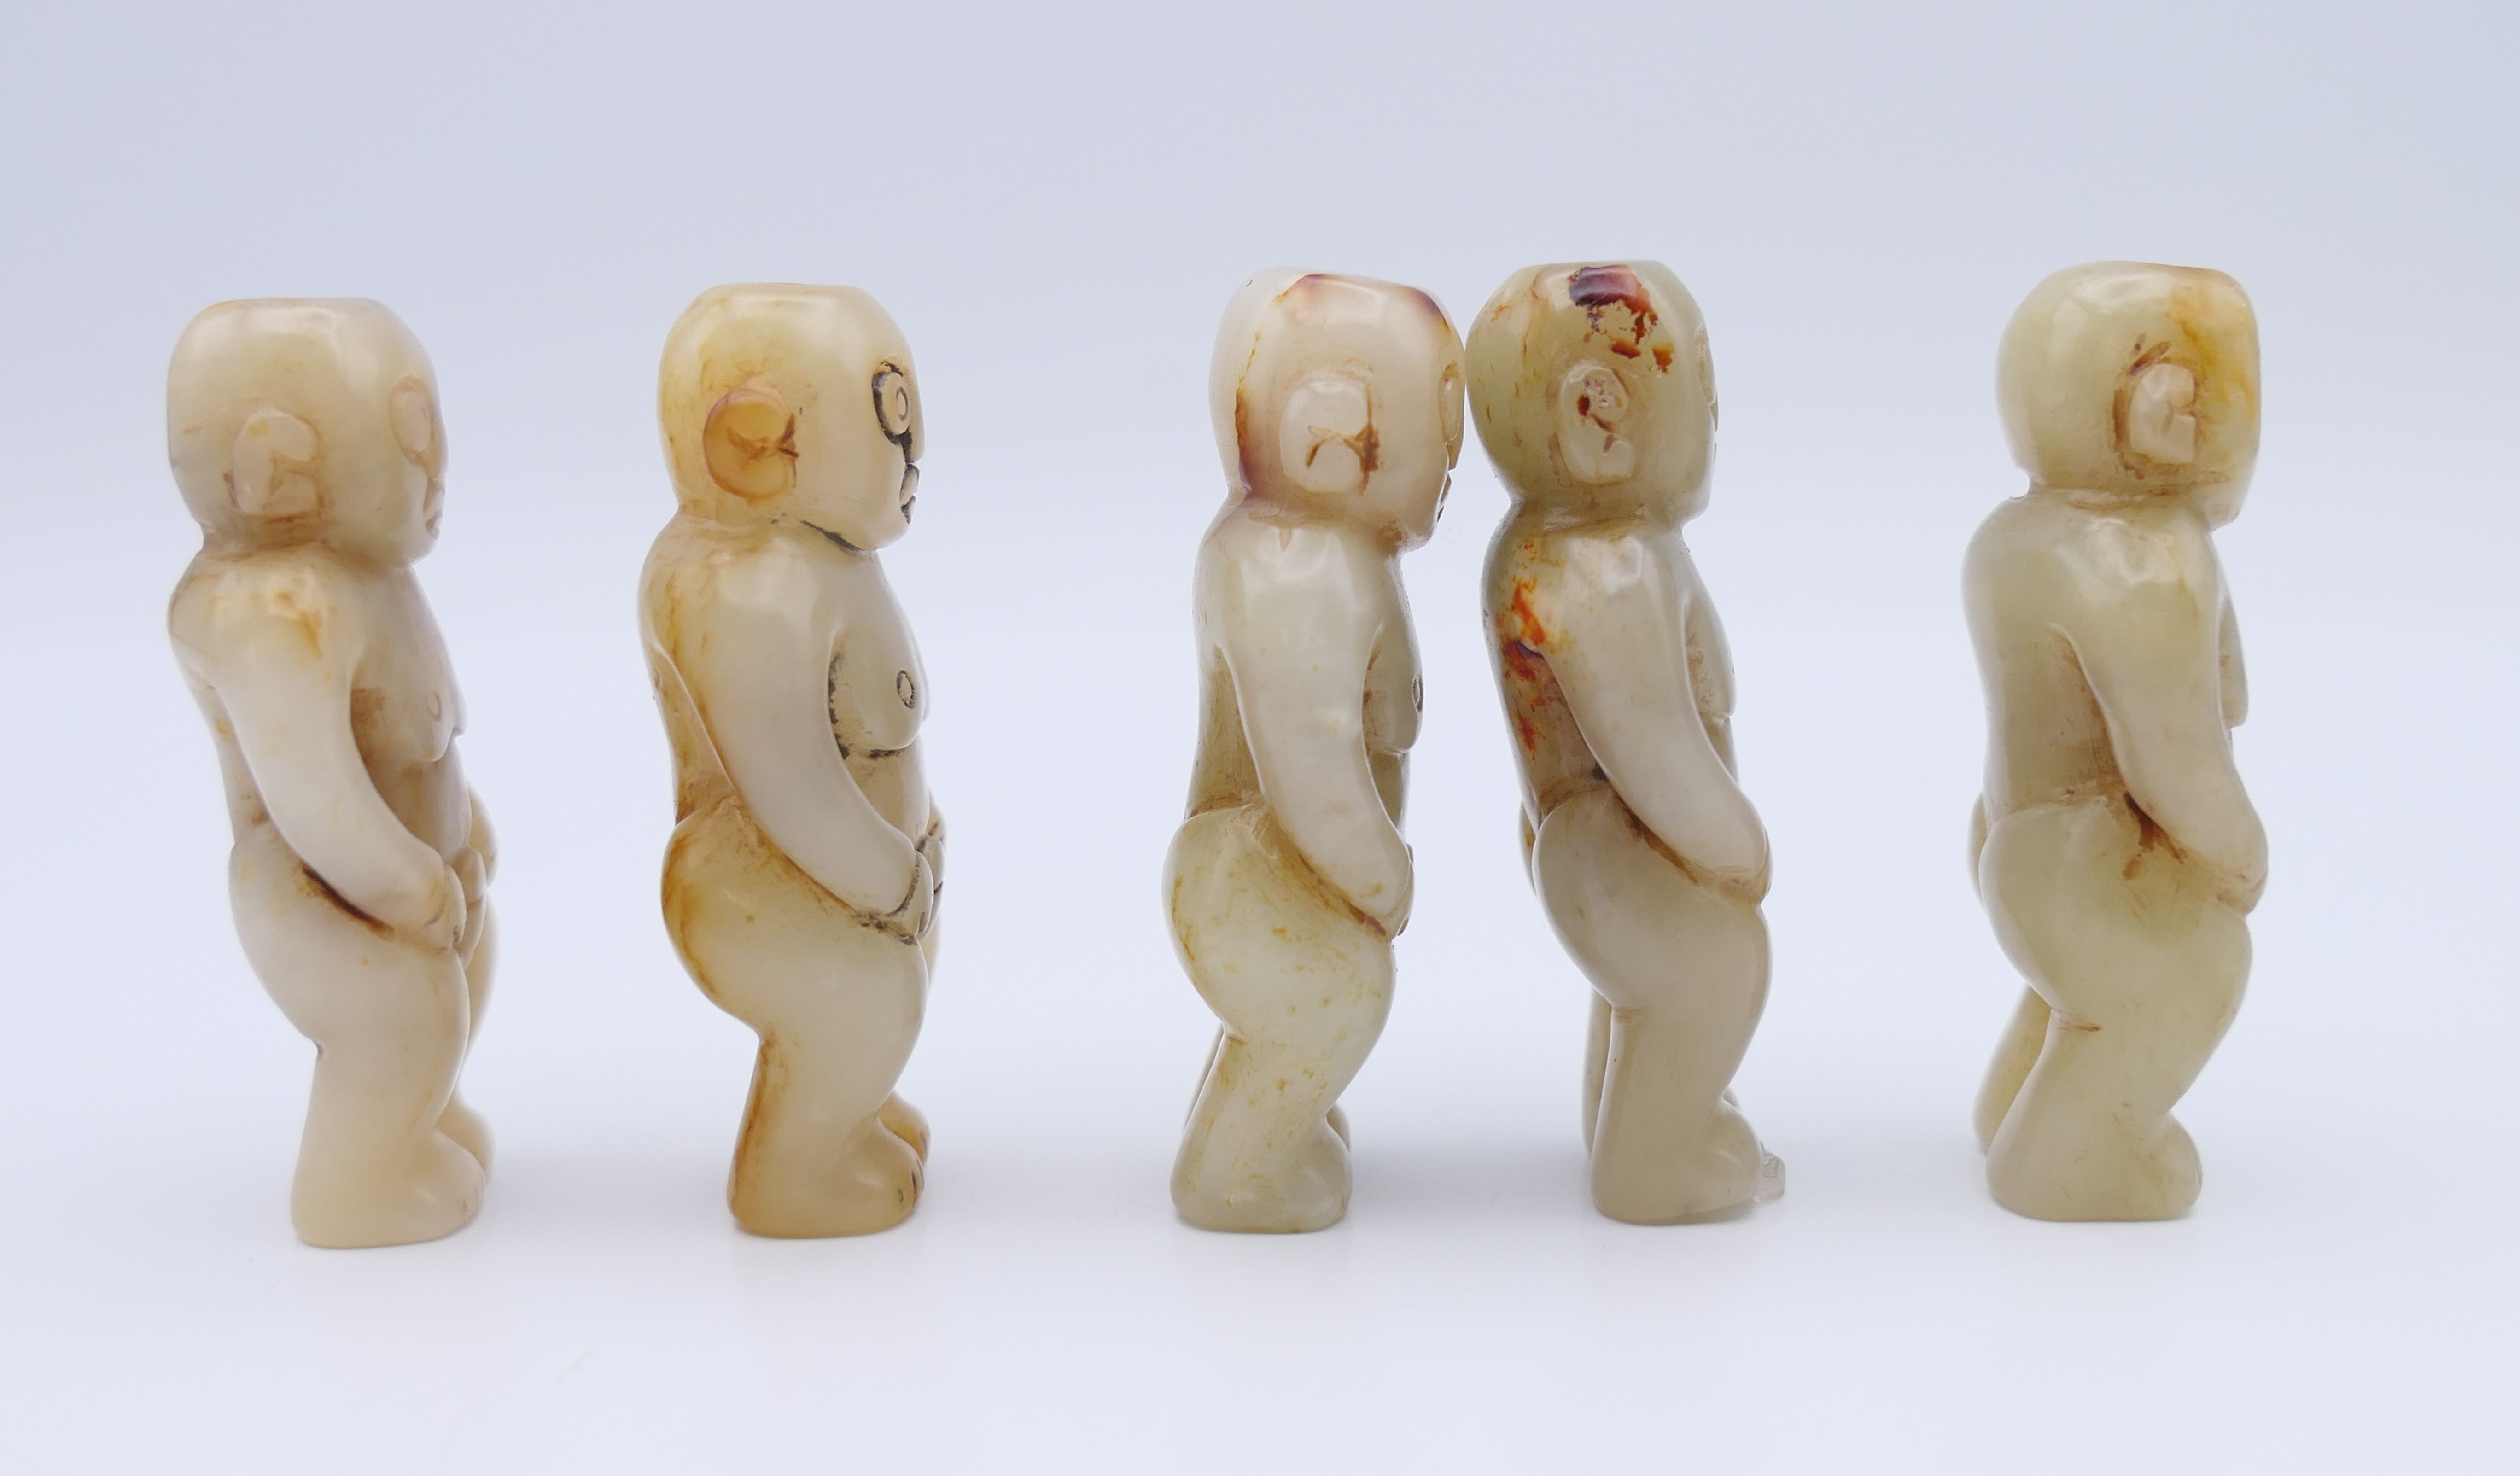 Nine Chinese fertility beads (seven male and two female), Han Dynasty. Each approximately 4 cm high. - Image 8 of 17